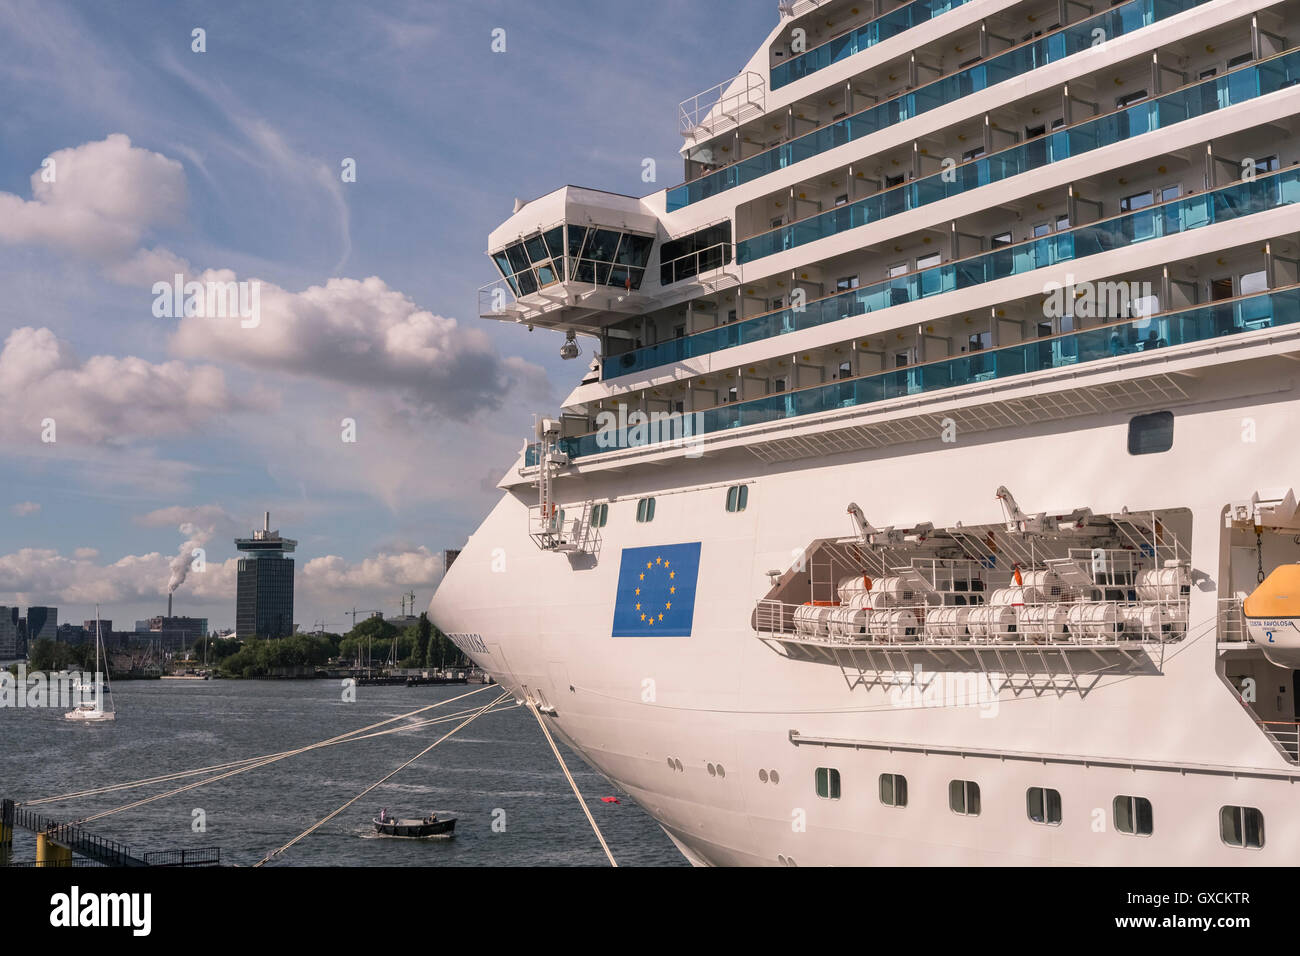 A large modern tourism cruise ship moored at the Passenger Terminal, Amsterdam, Netherlands. Stock Photo